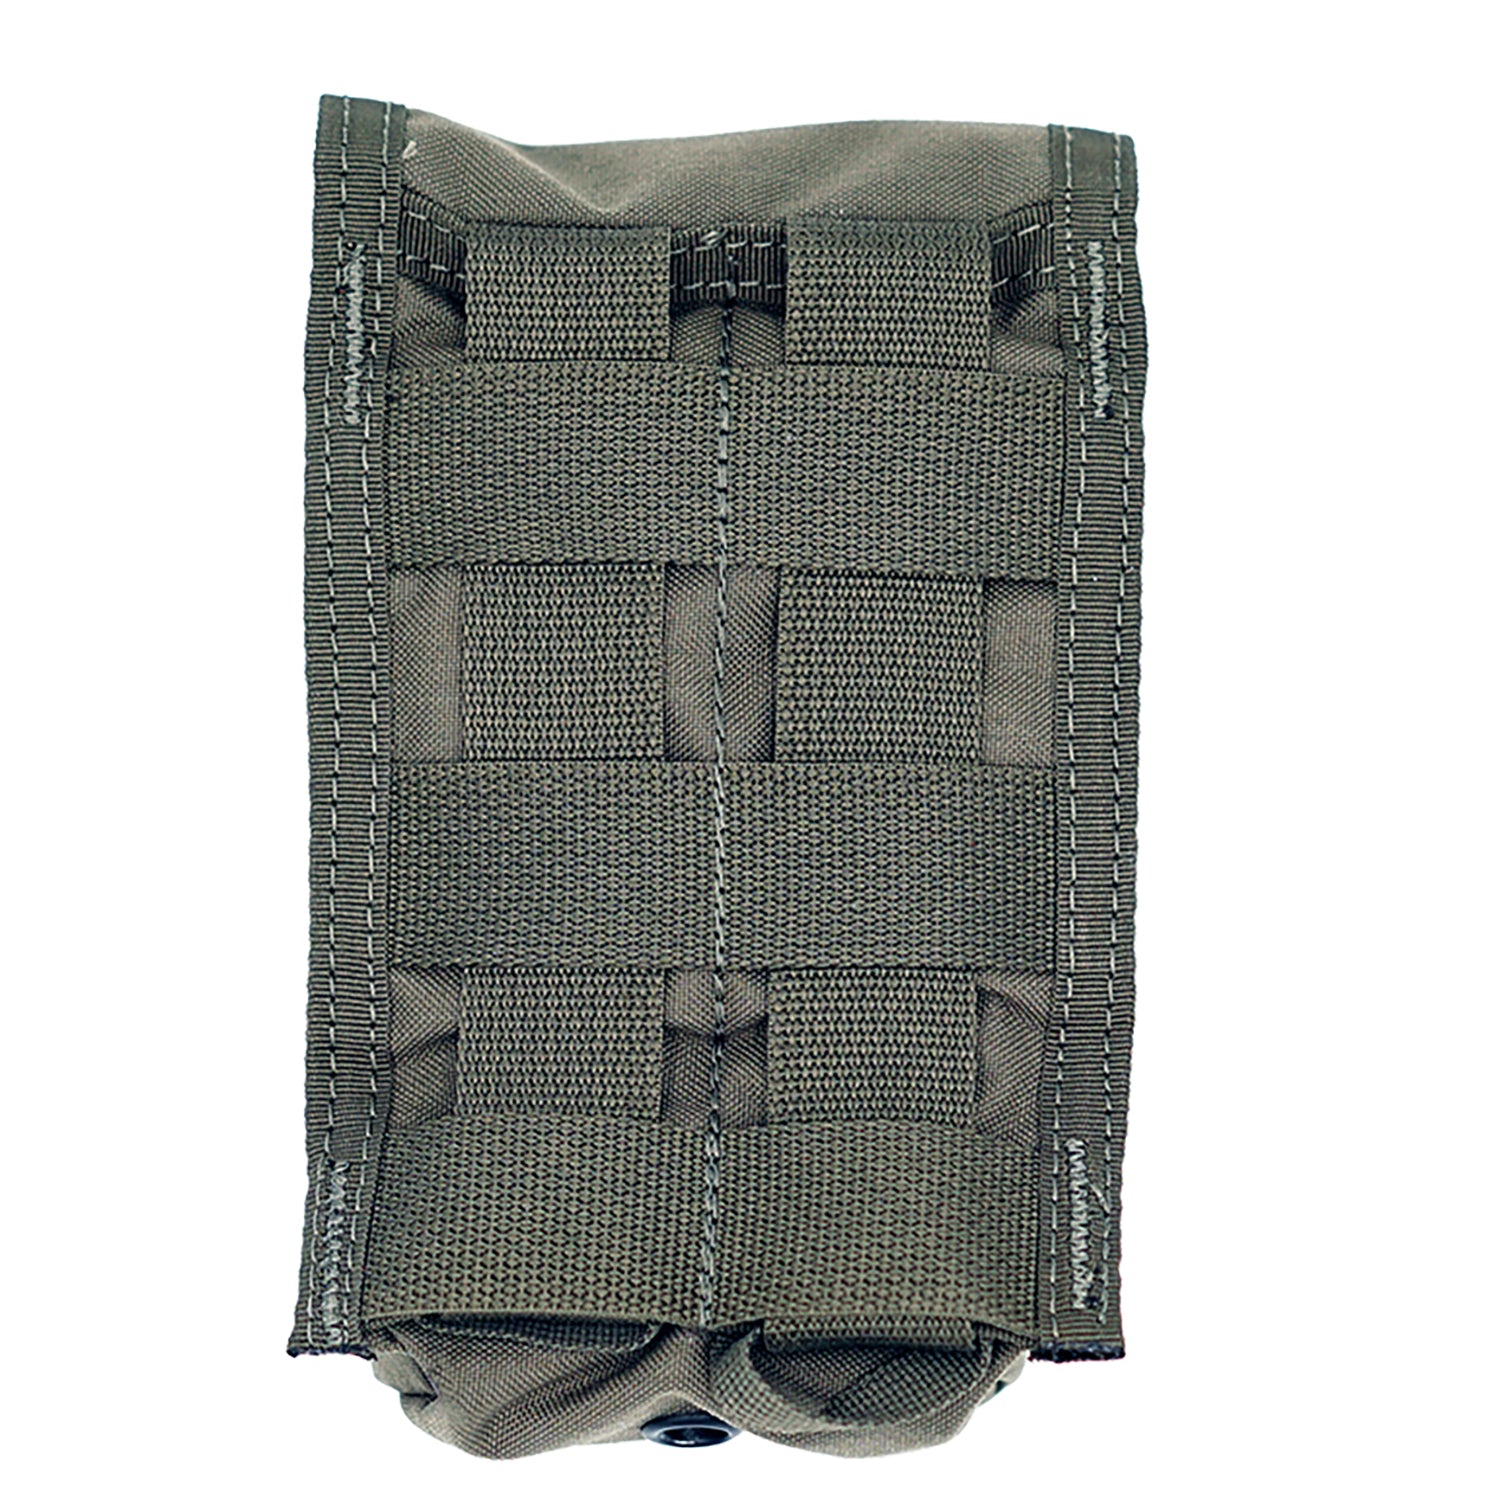 Pre MSA Paraclete style Smoke green tiered SR25 mag pouch - Shekkin Gears